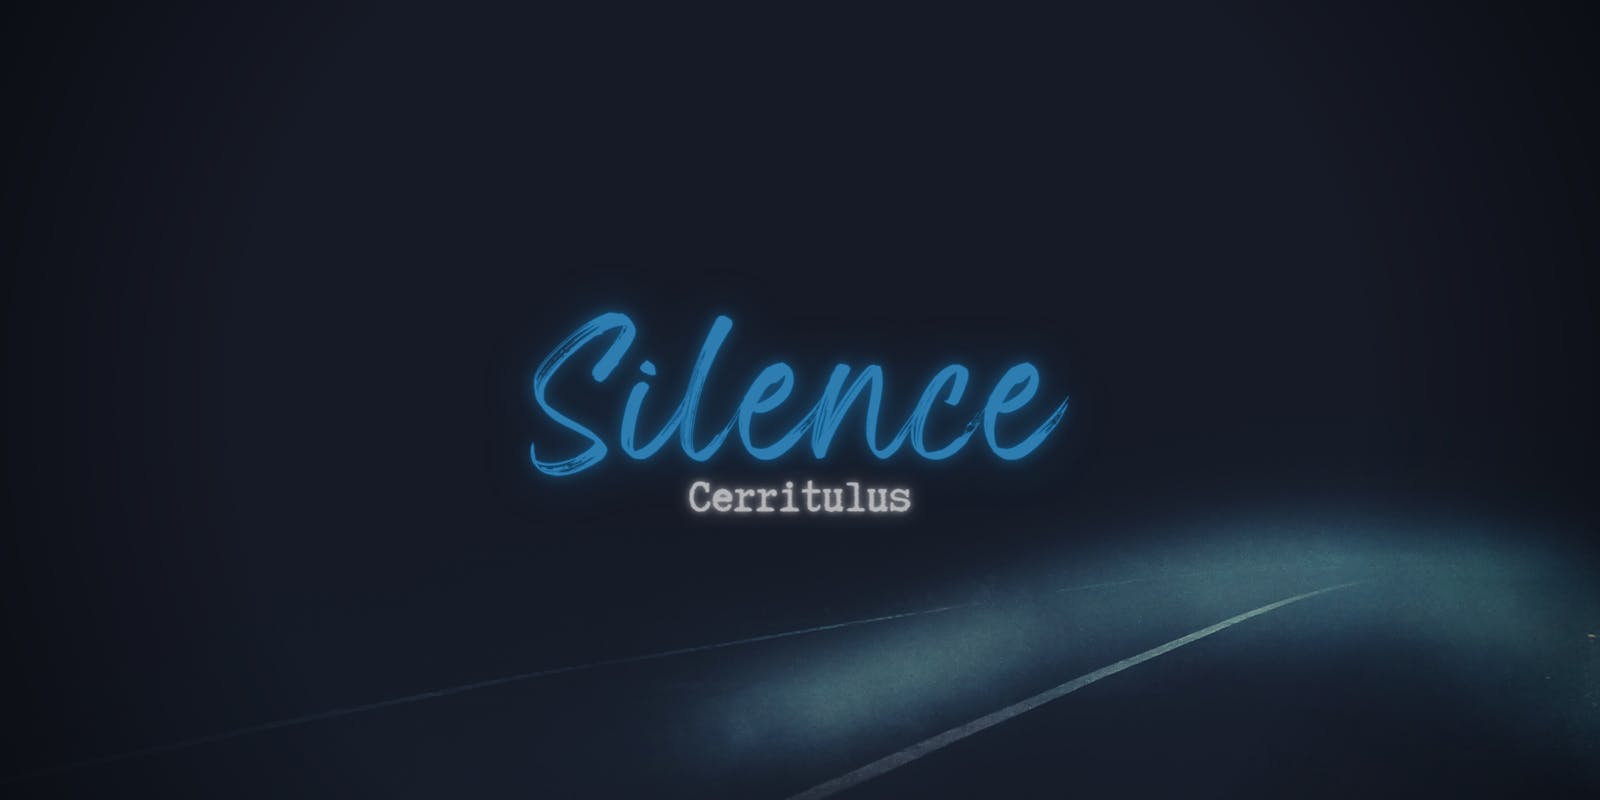 Silence by Cerritulus